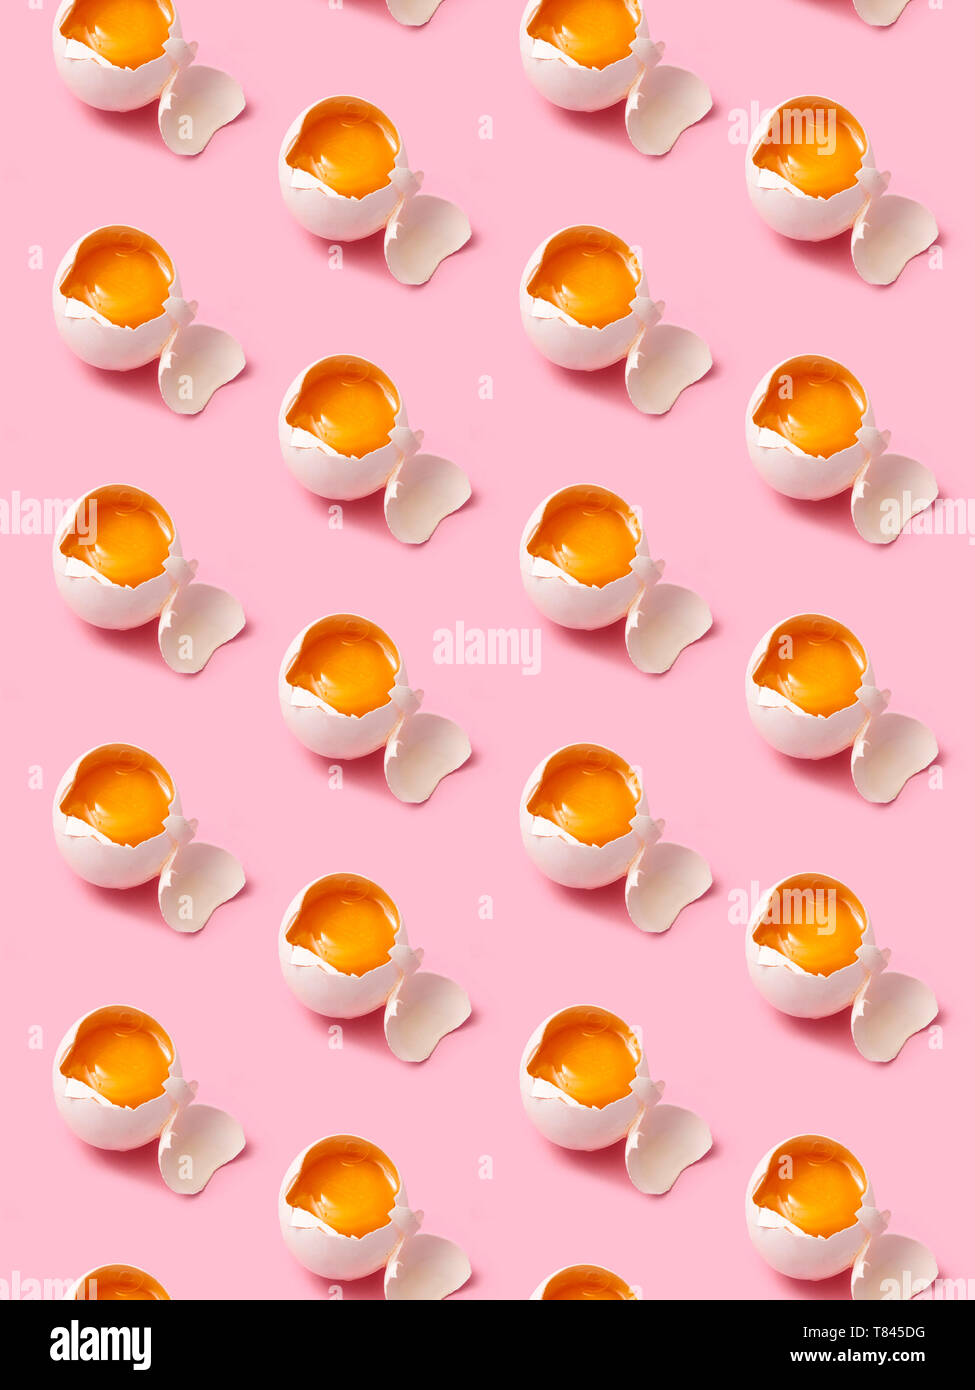 Broken eggs arranged in rows on pink background Stock Photo